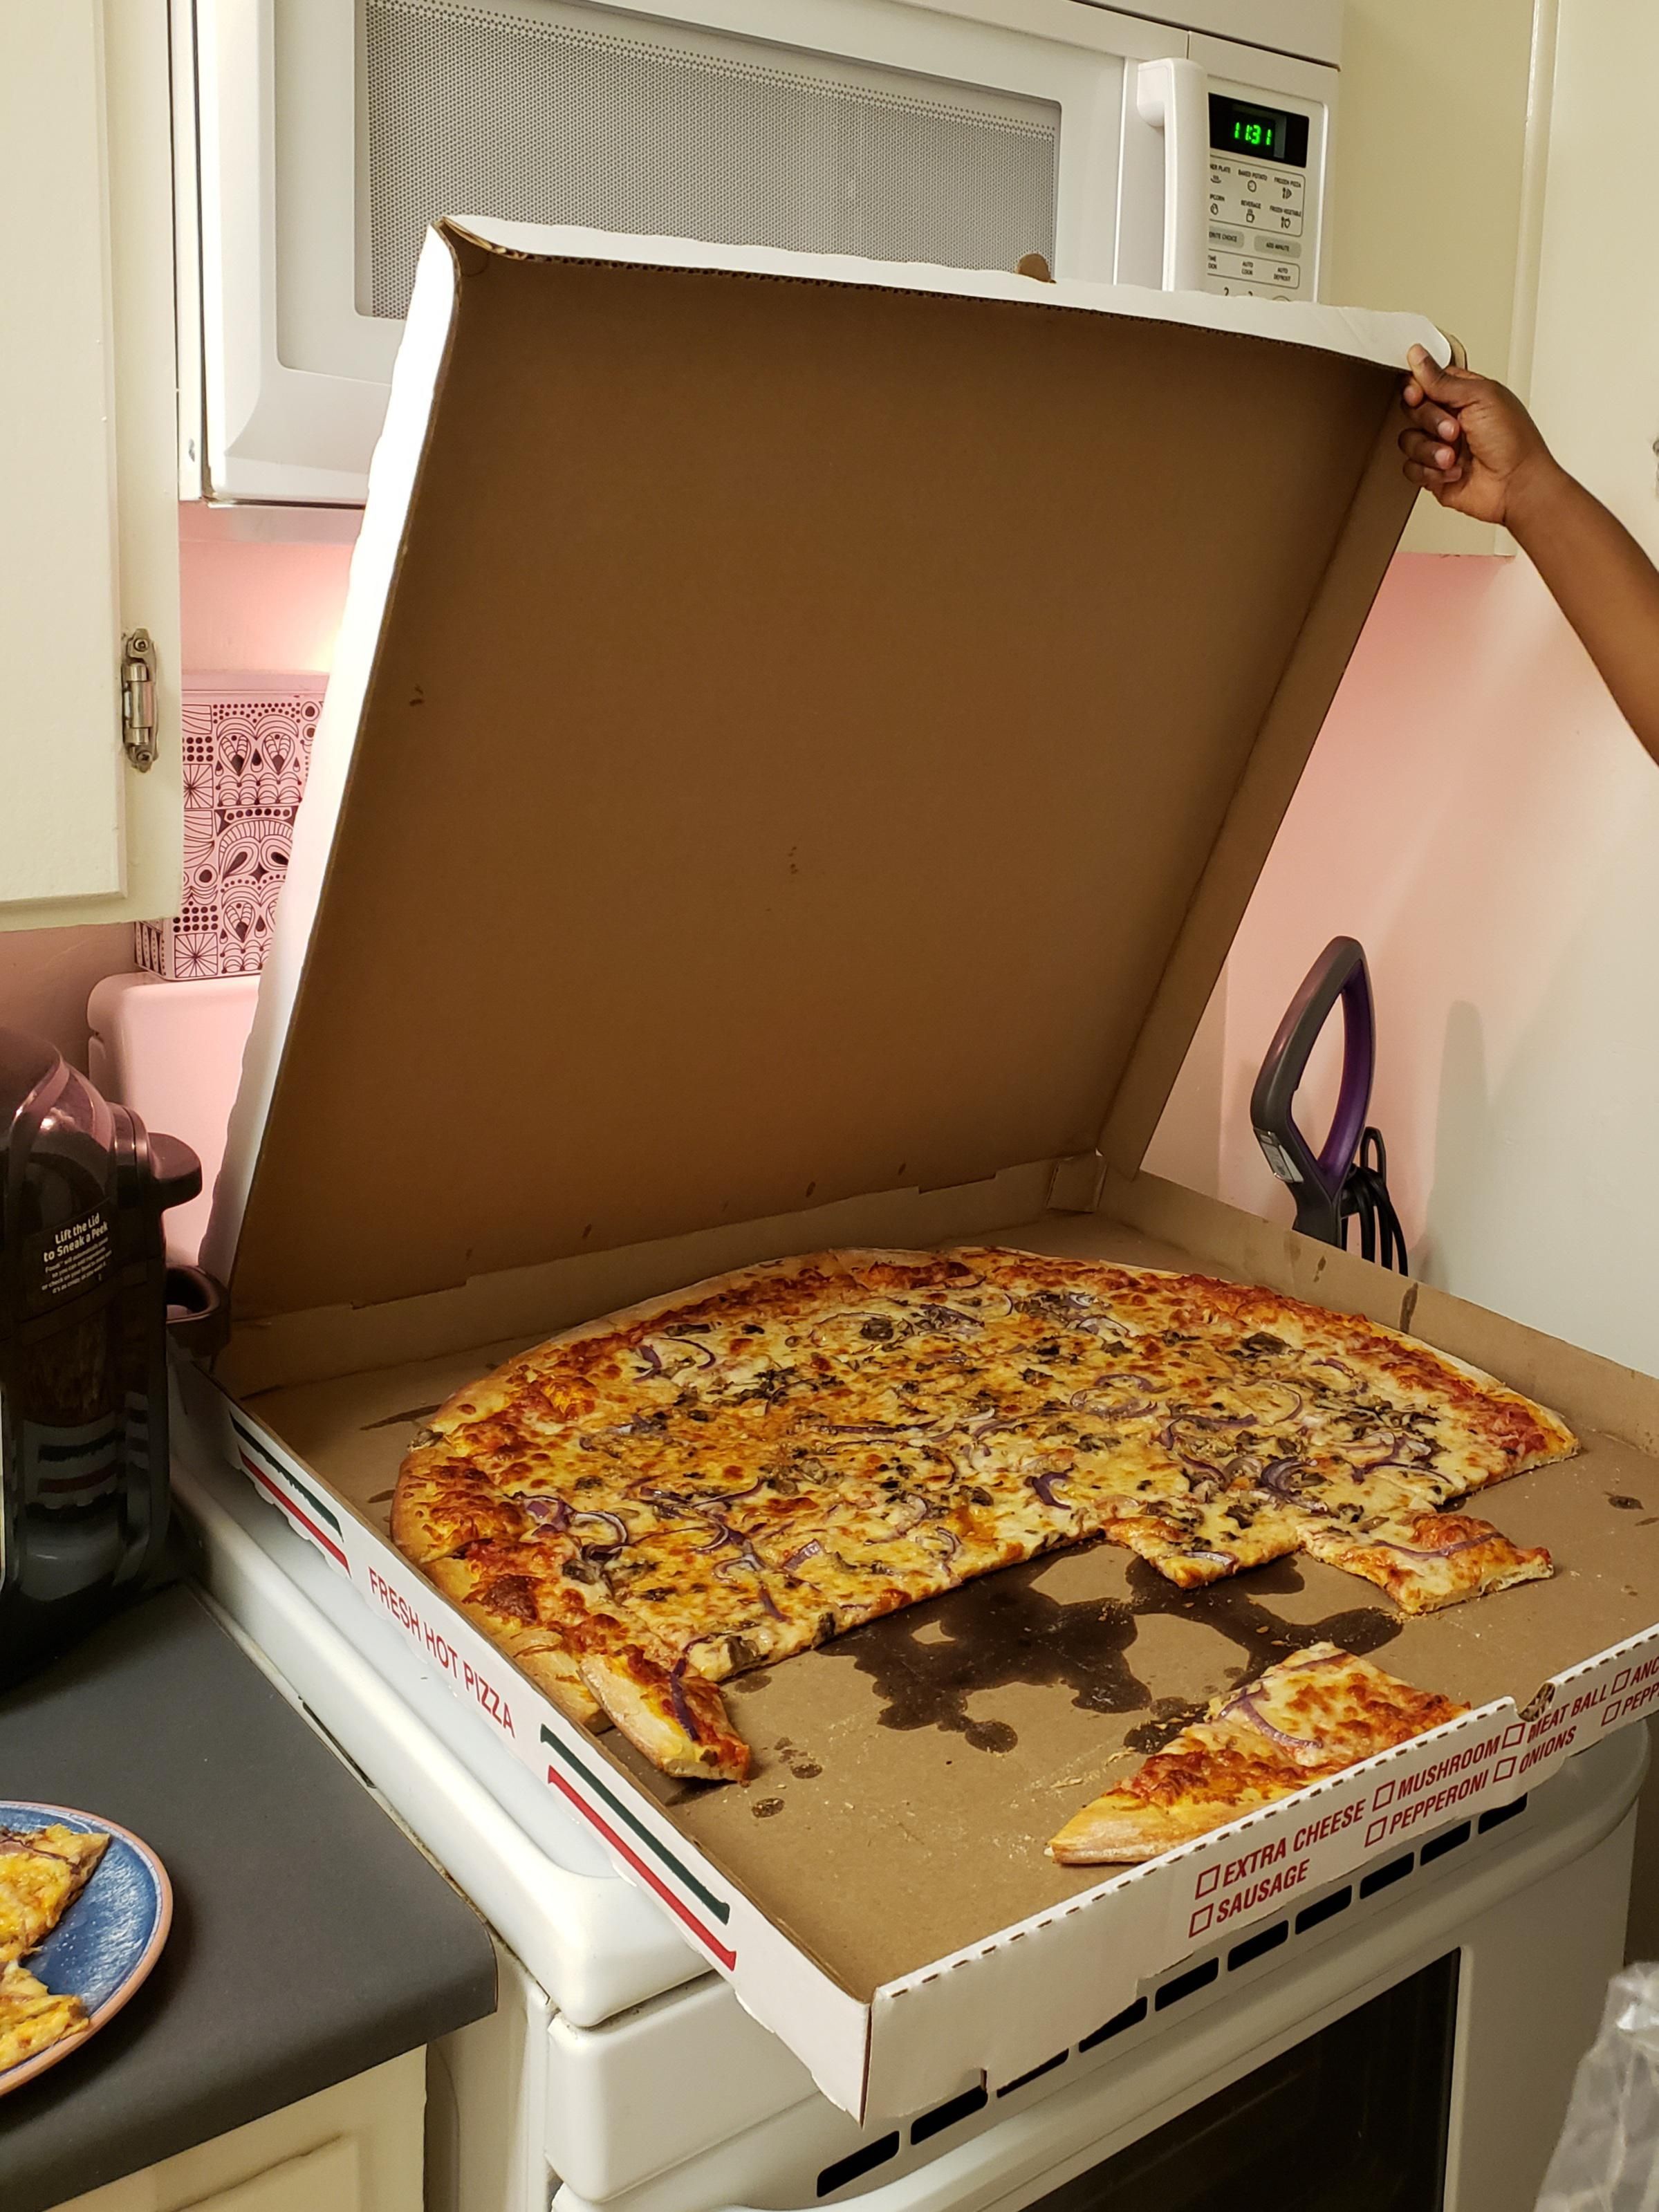 My wife isn't great at measurements and ordered a 28" pizza for the two of us.